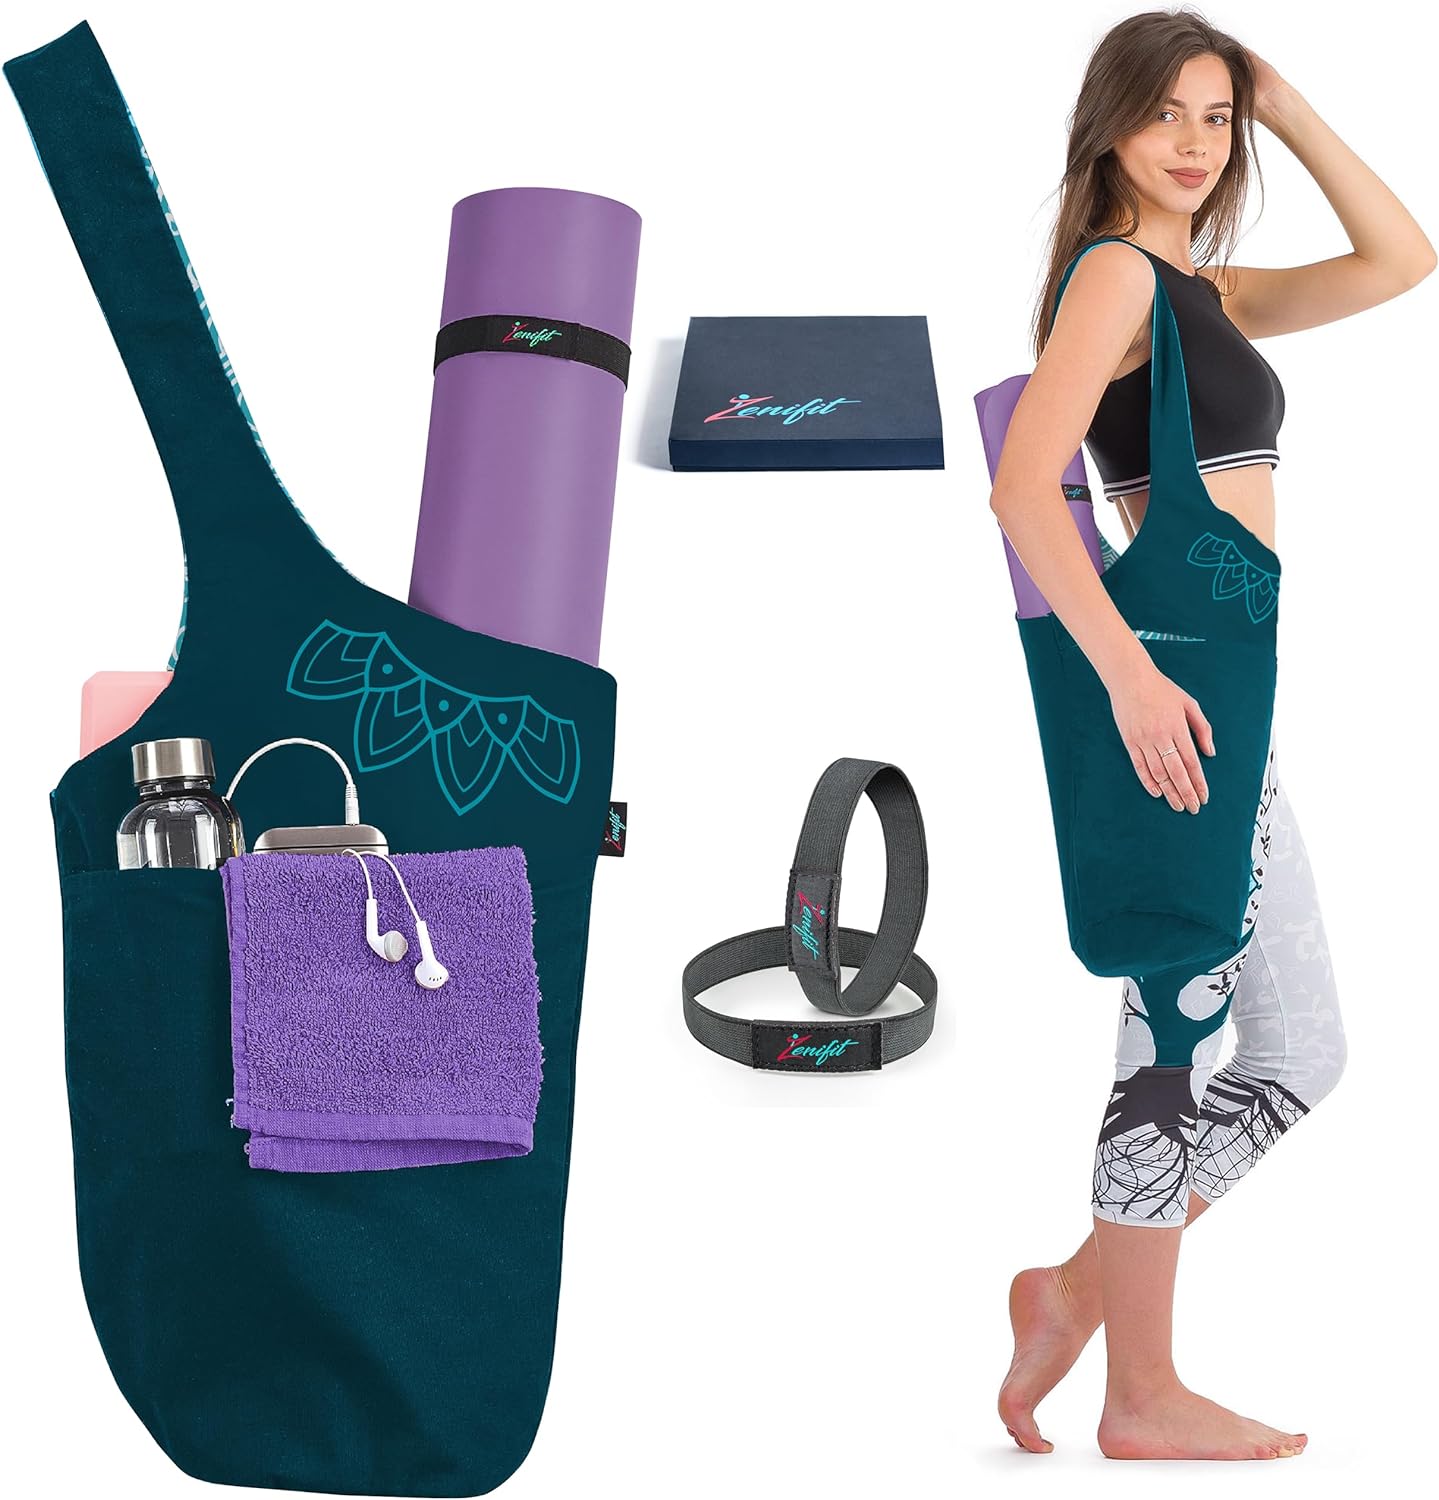 Yoga mat bag two tone teal with accessories, gift box and elastics, women wearing yoga bag on shoulder